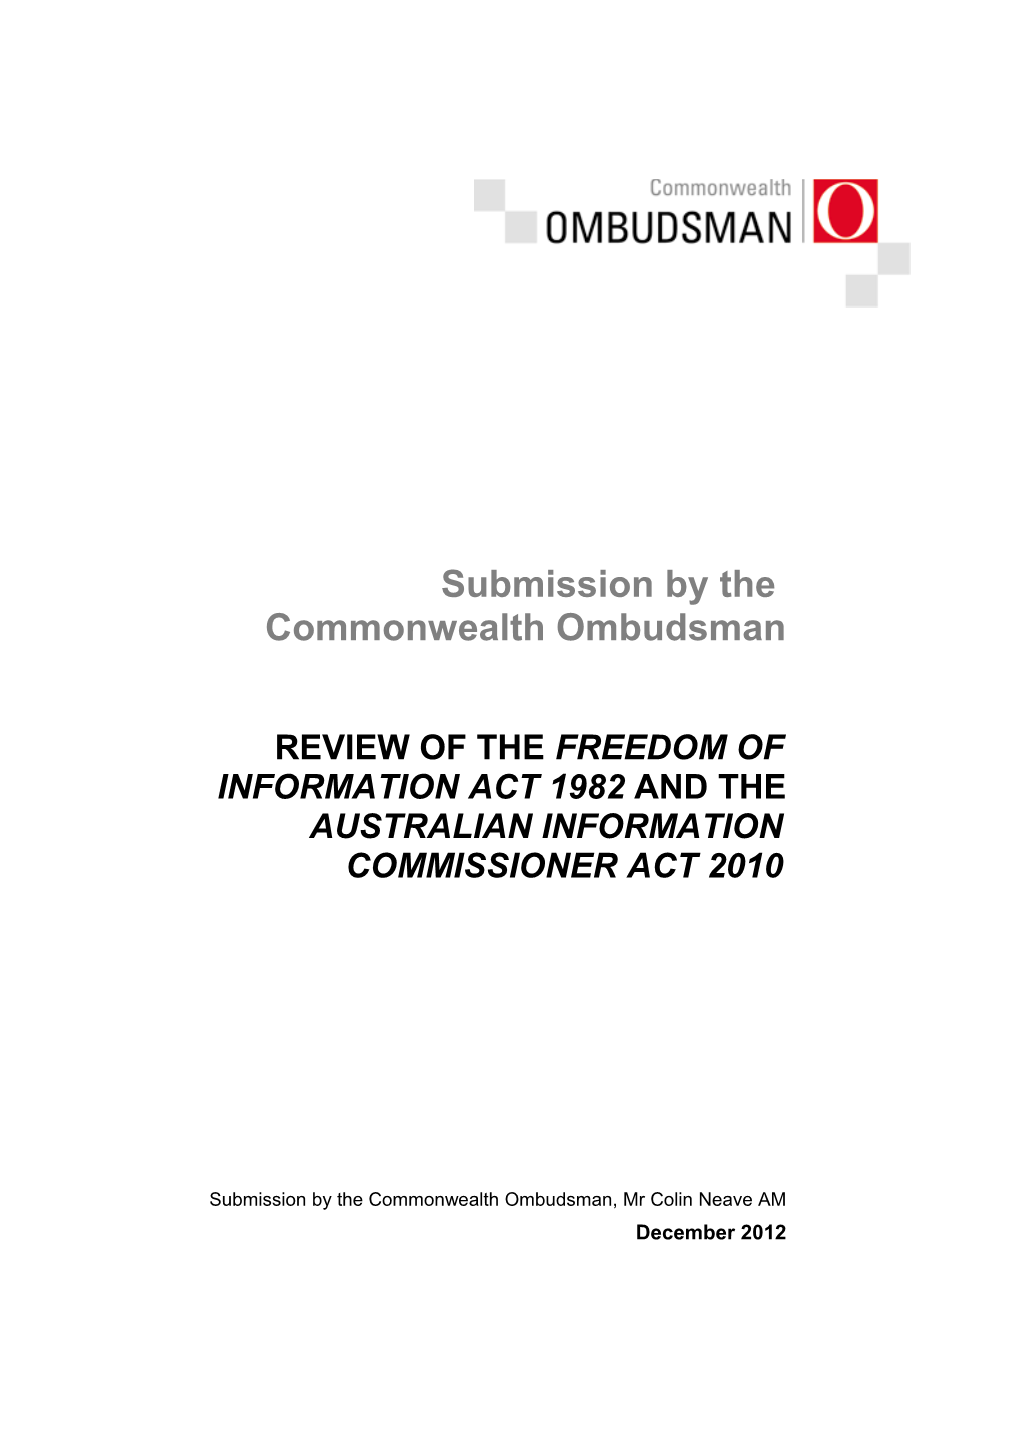 Review of the Freedom of Information Act1982 and the Australian Information Commissioner